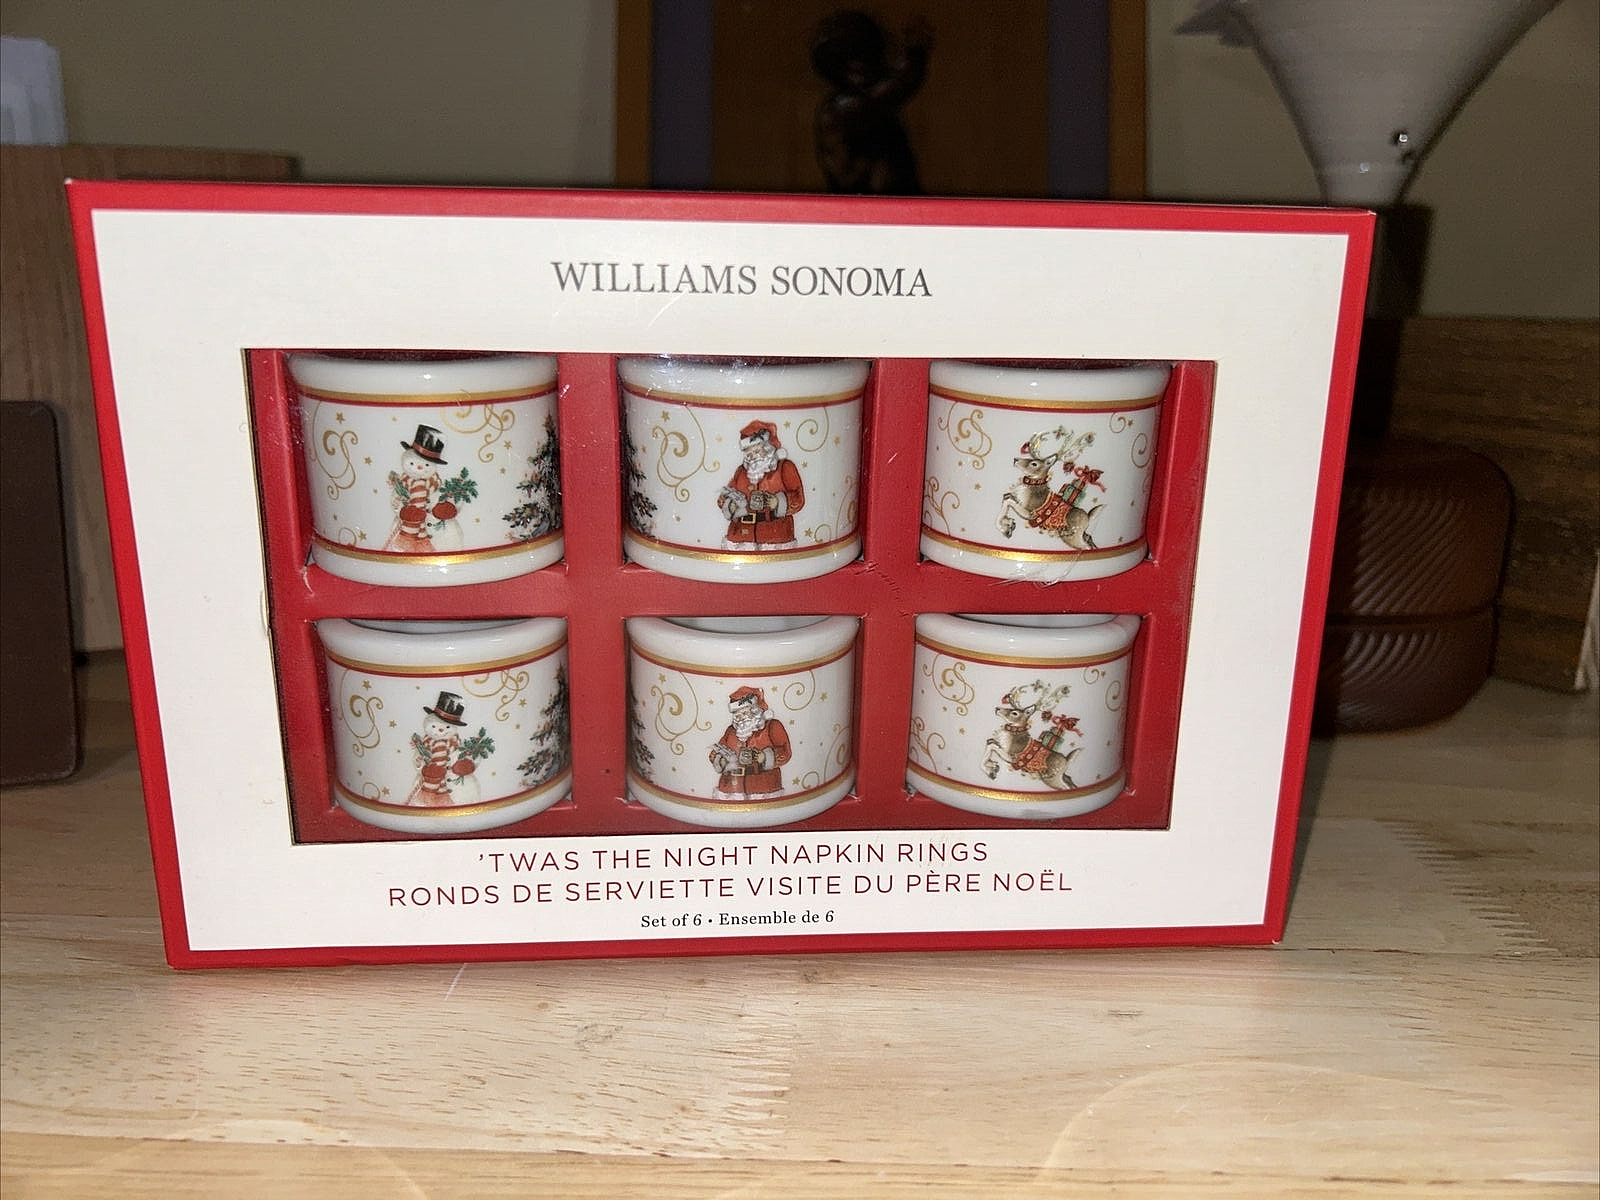 WILLAIMS SONOMA TWAS THE NIGHT NAPKIN RINGS SET OF (6) NEW IN BOX CHRISTMAS 2018